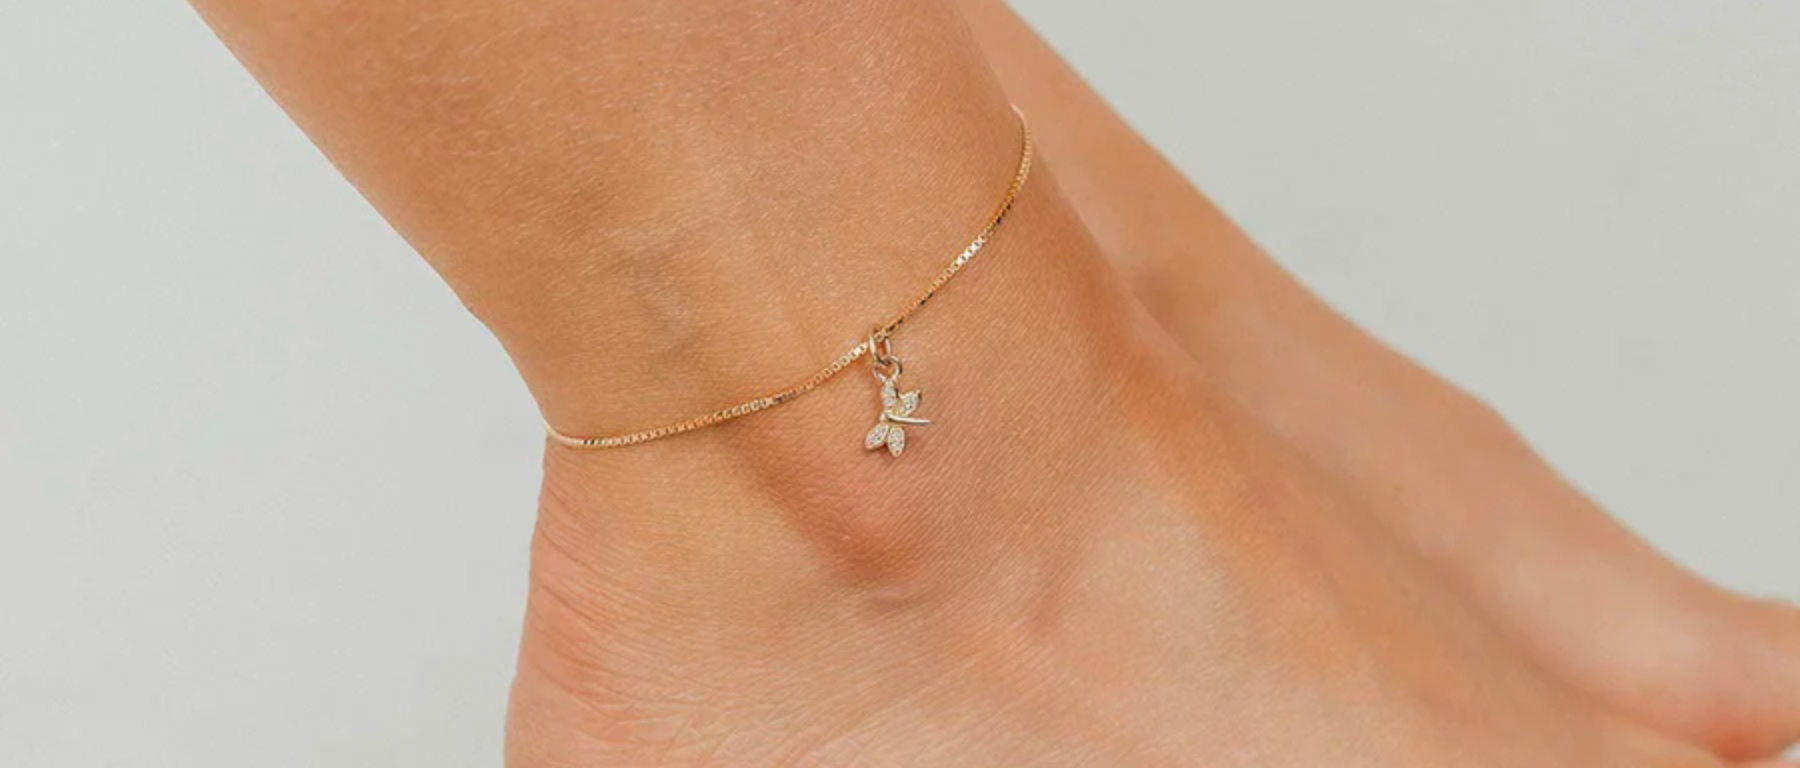 wehoautodetail DRAGONFLY CZ CHARM ADJUSTABLE ANKLET